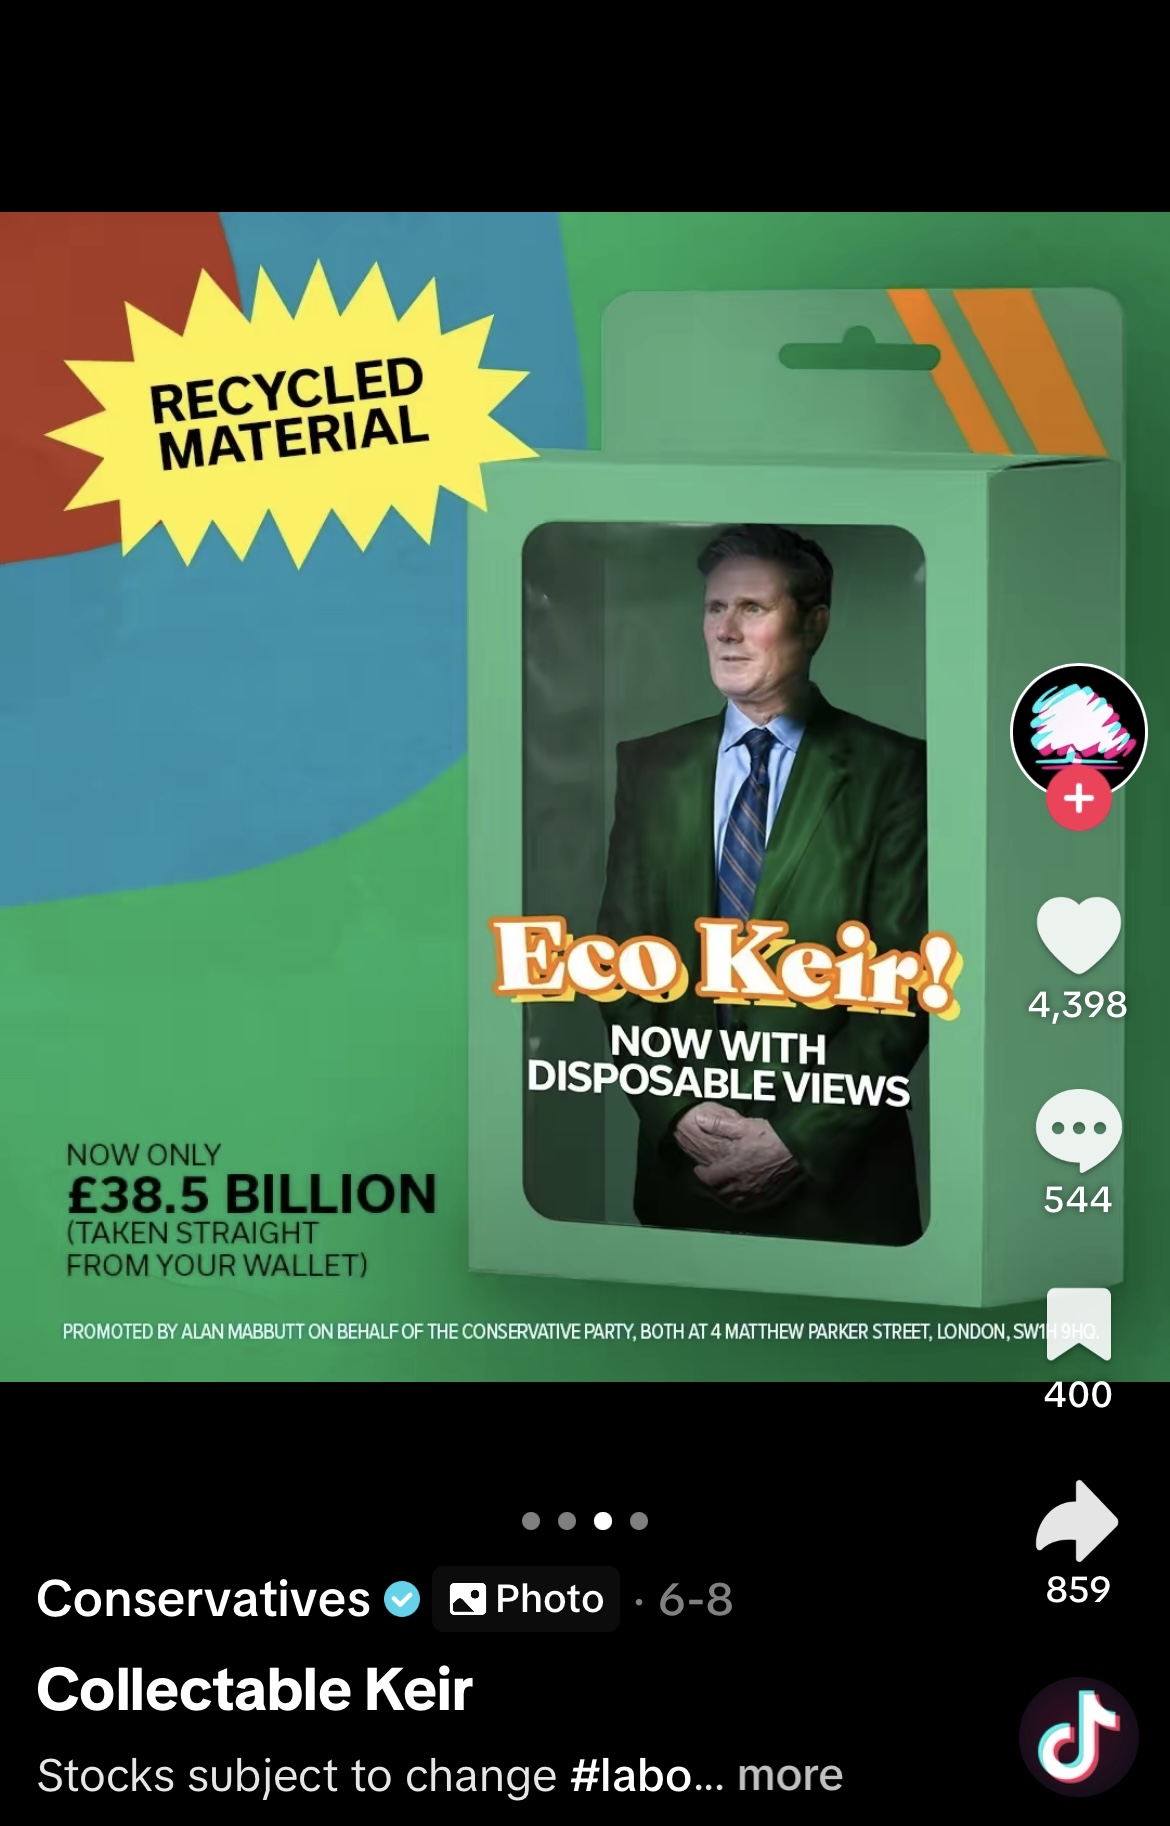 A screenshot from a TikTok on the Conservative Party's official account